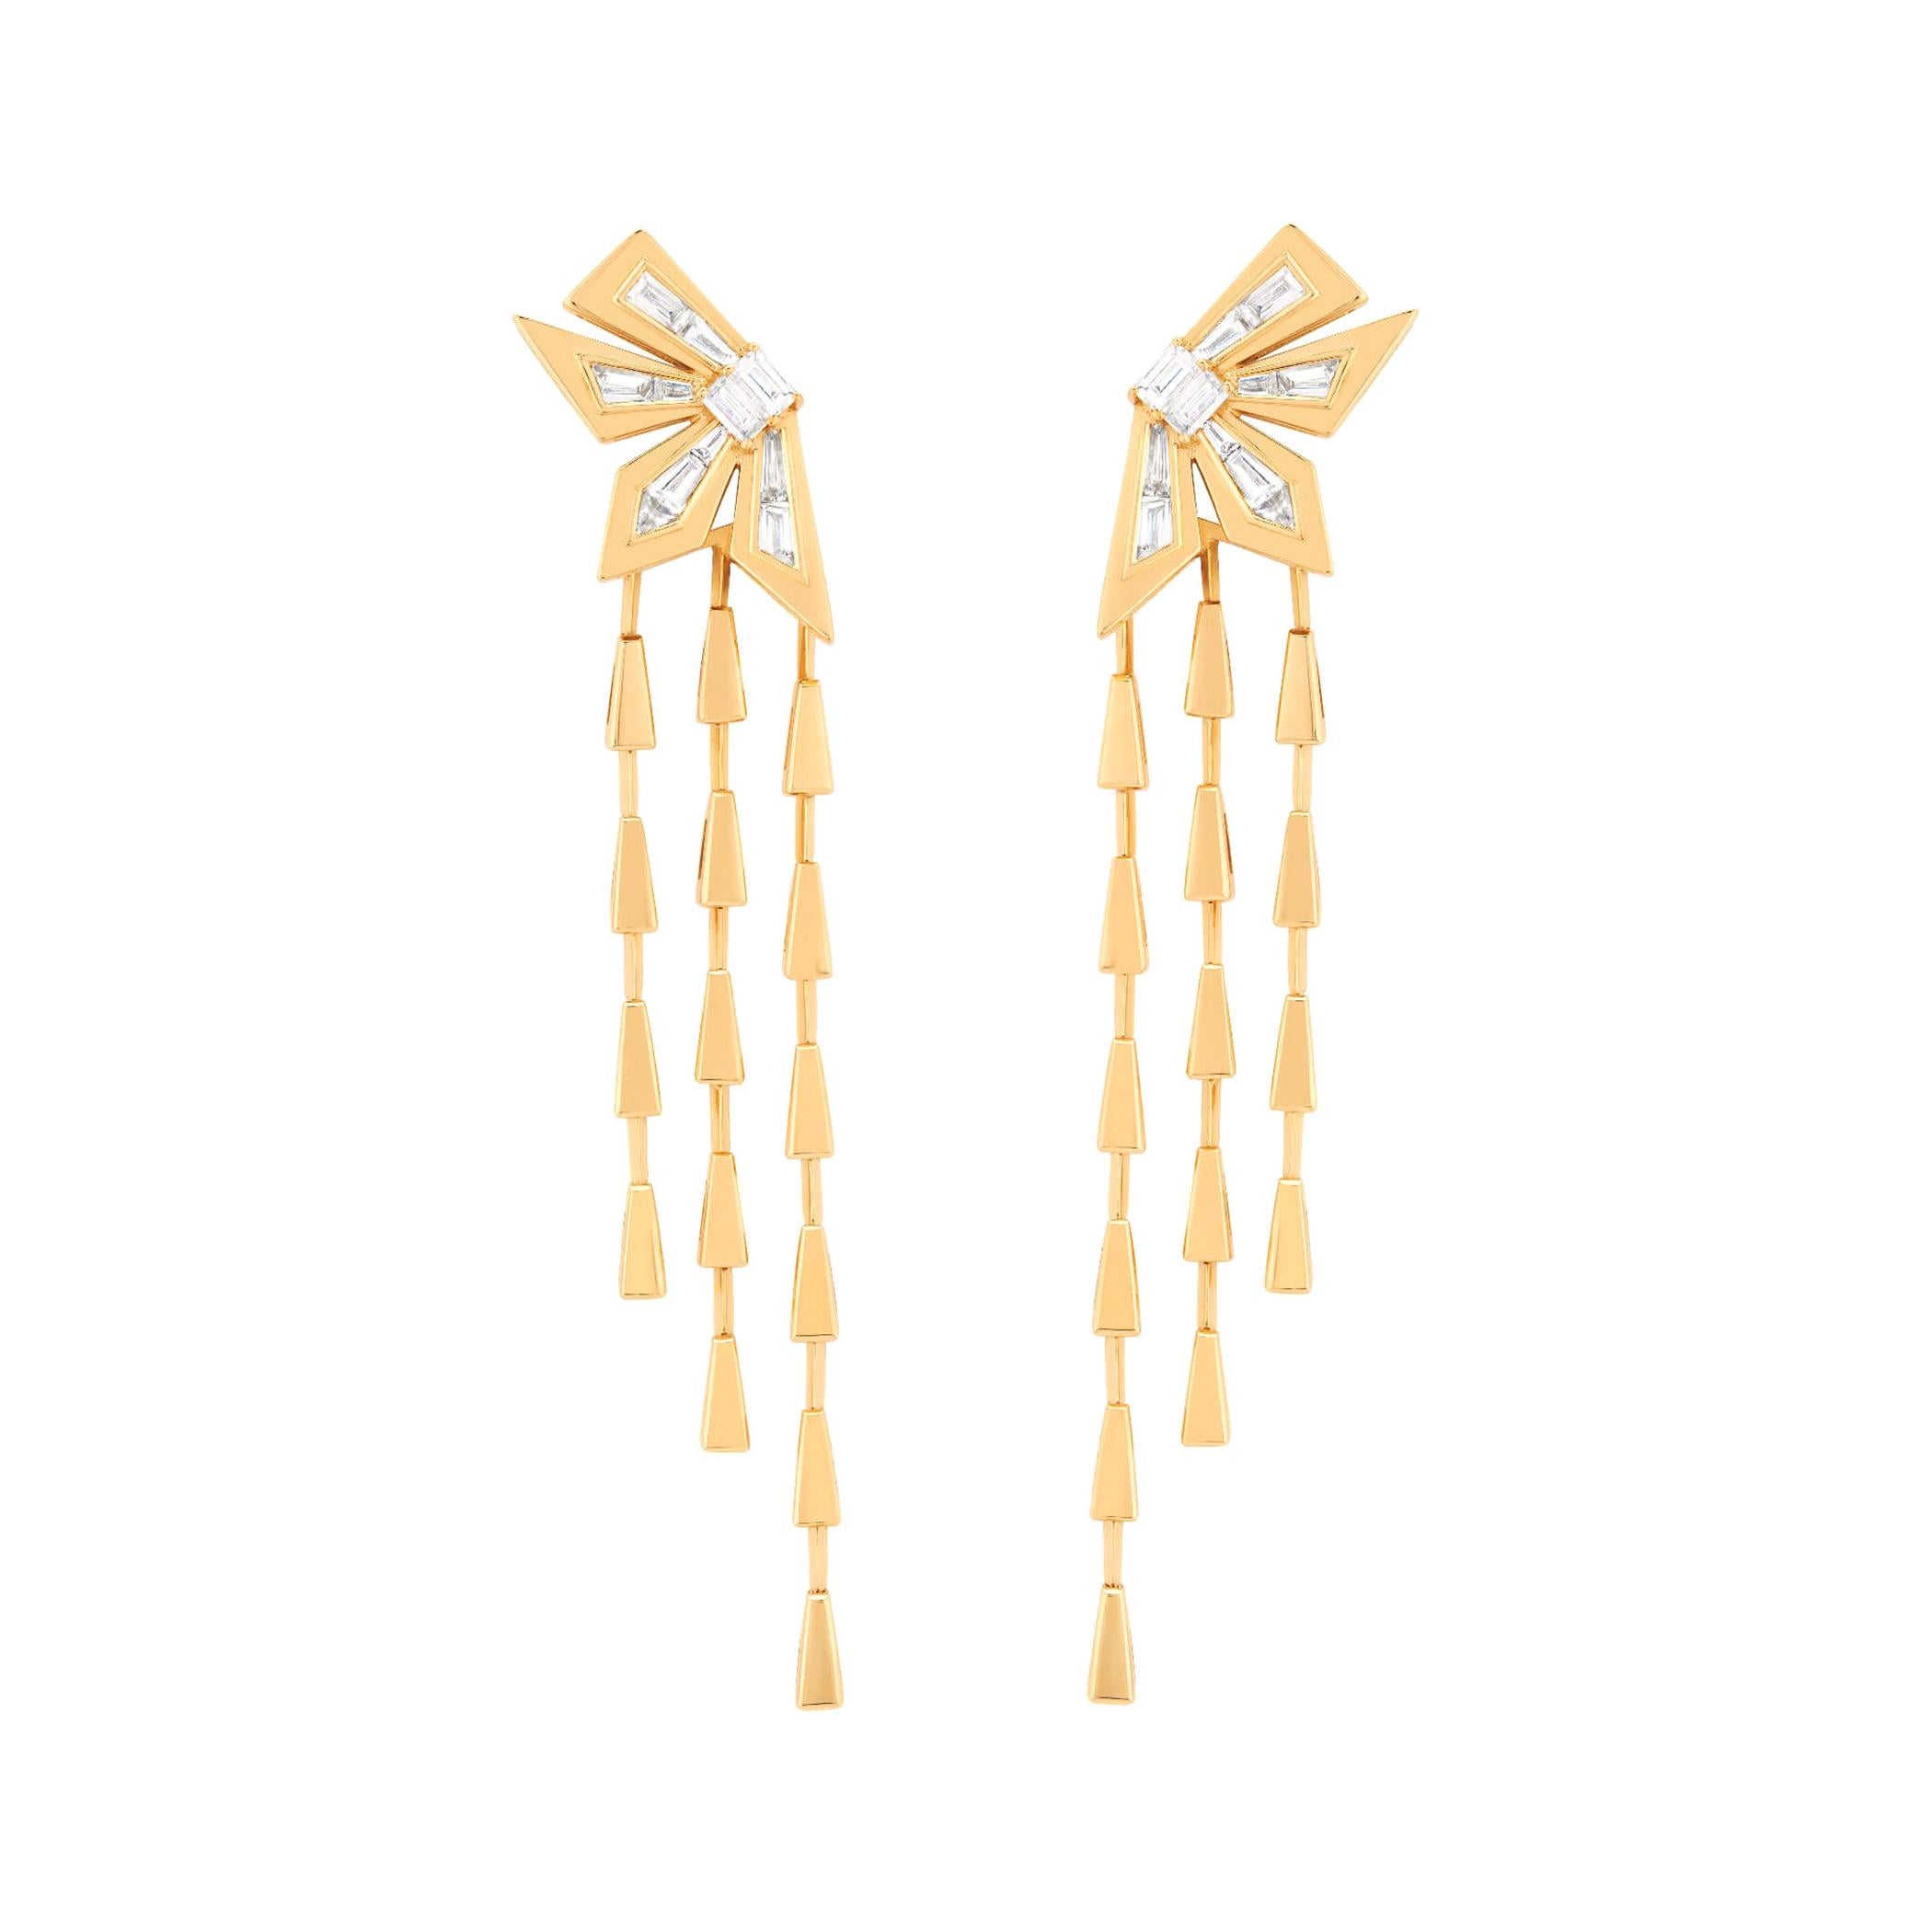 Stephen Webster Dynamite Cascade Yellow Gold and White Diamond '1.13ct' Earrings